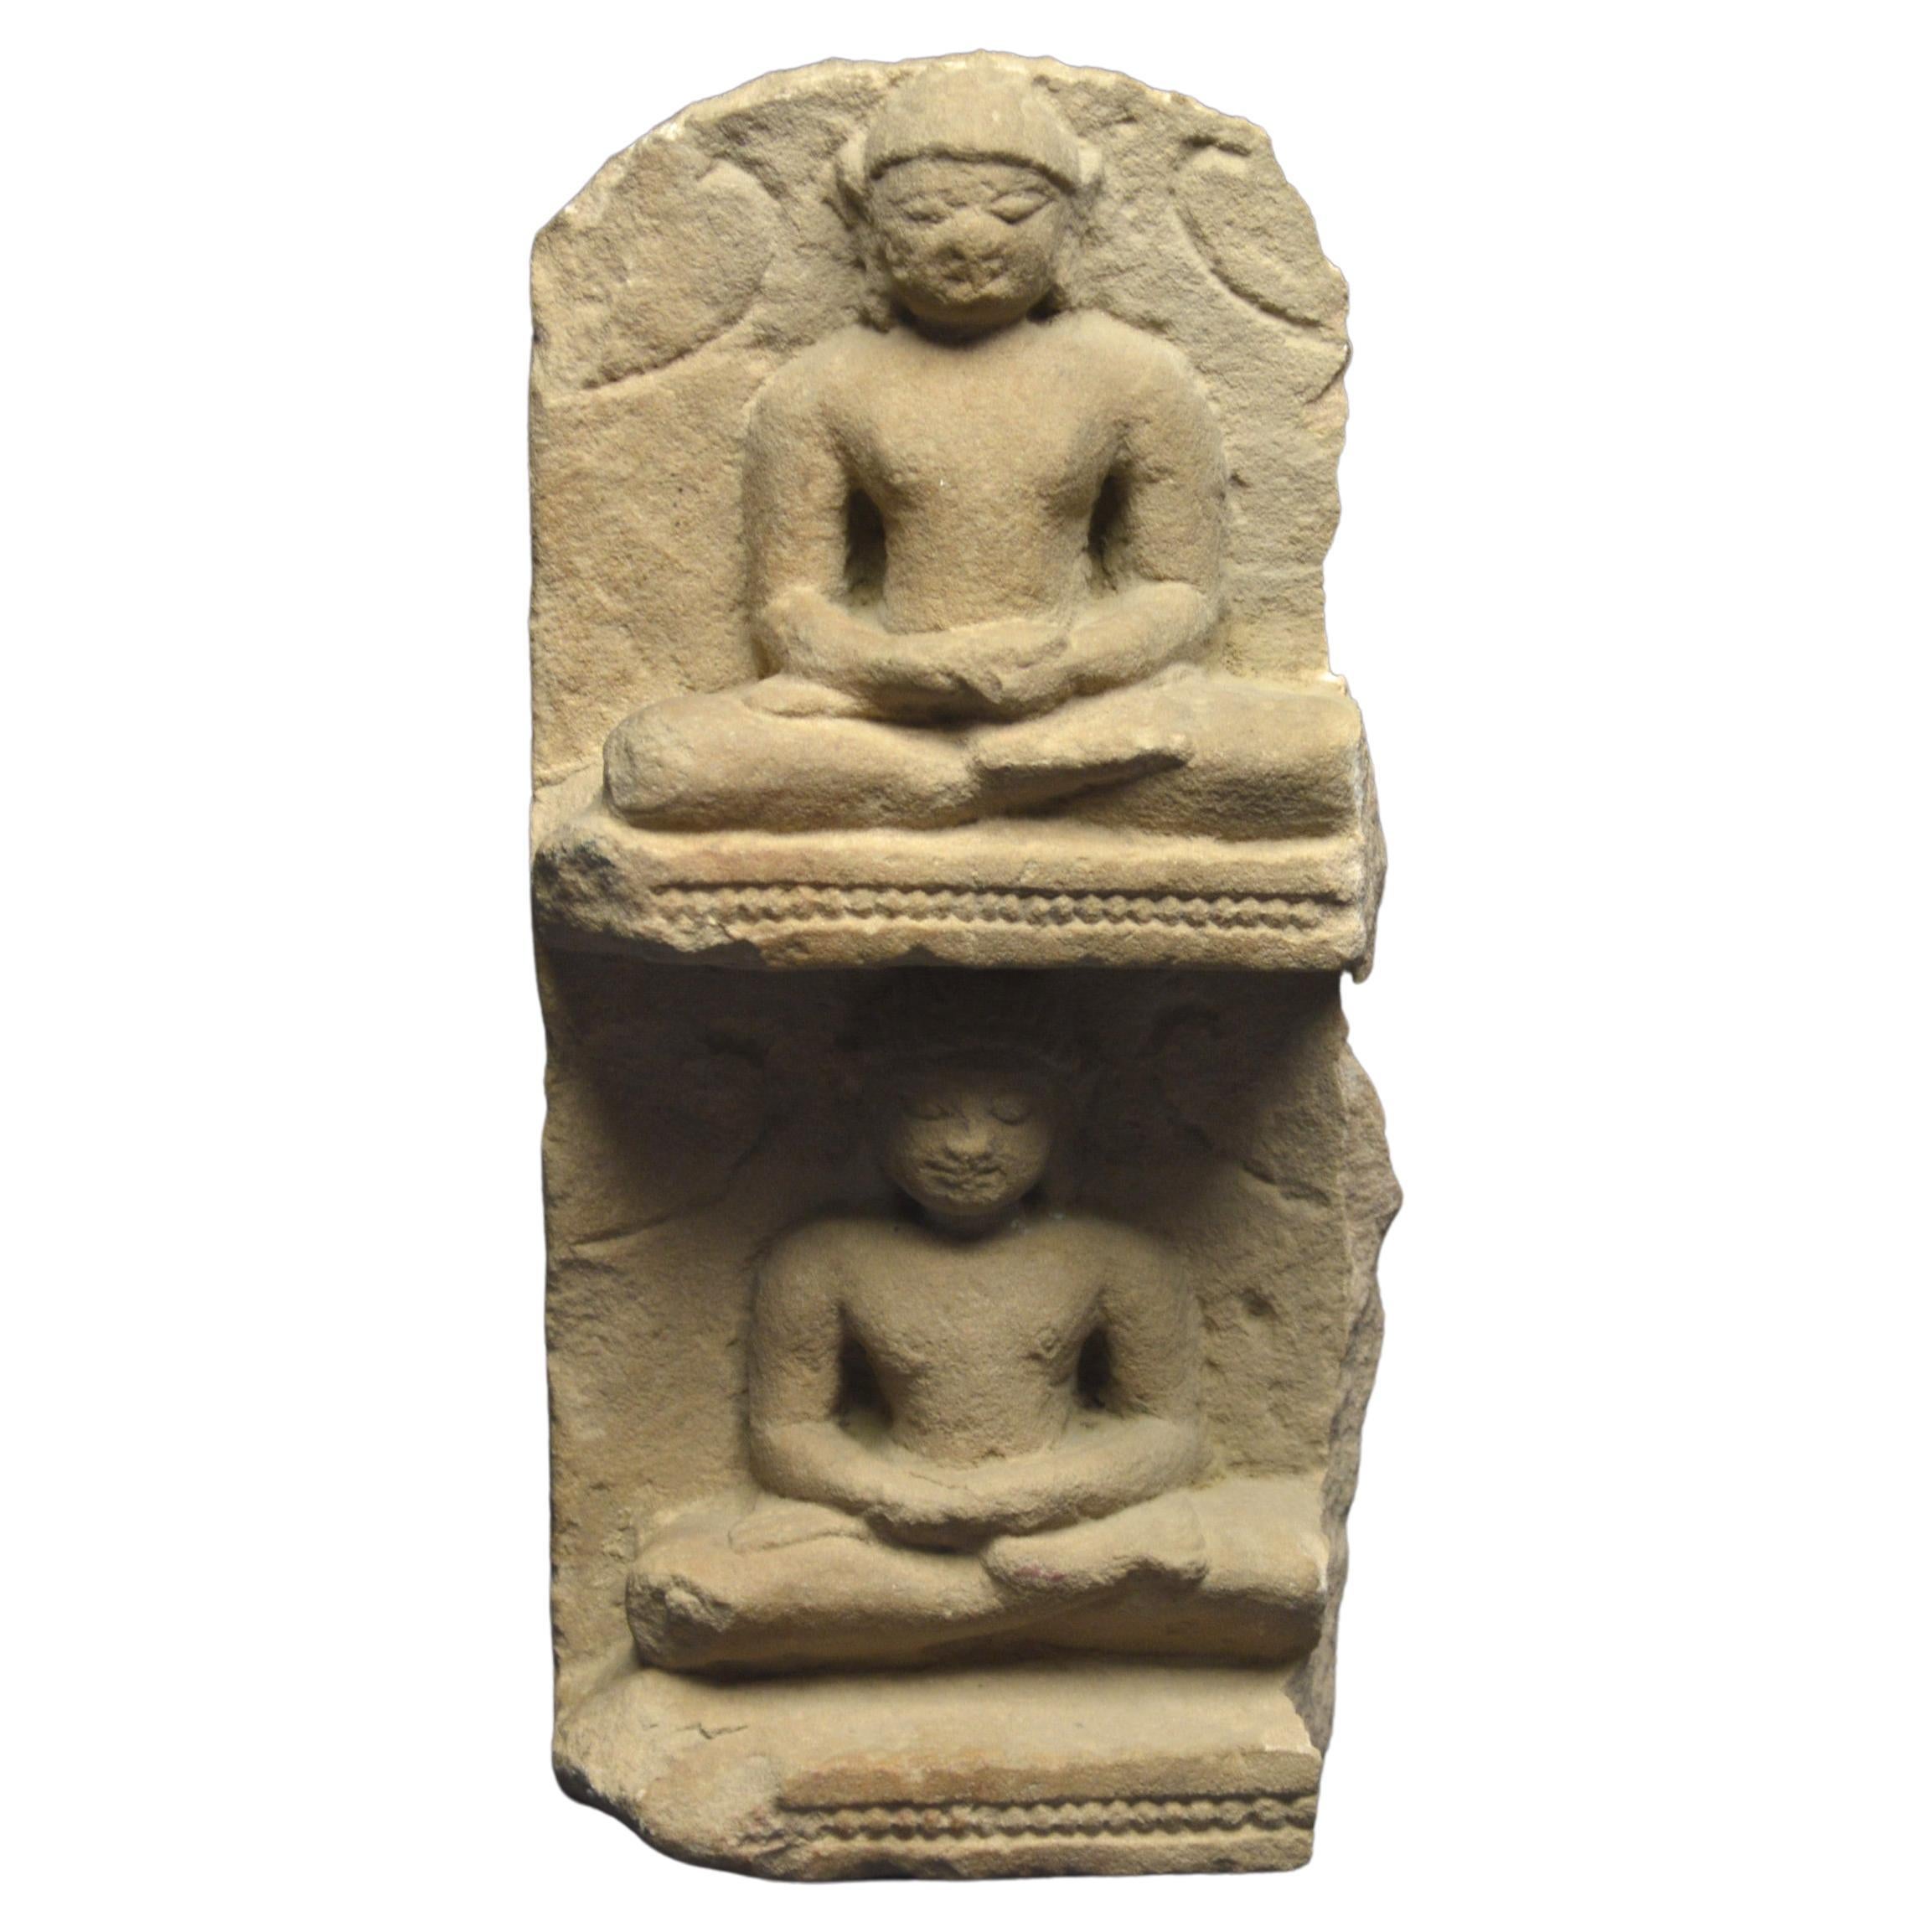 India, 8th - 10th Century, Jain Culture, Stele fragment with two Tirthankaras 